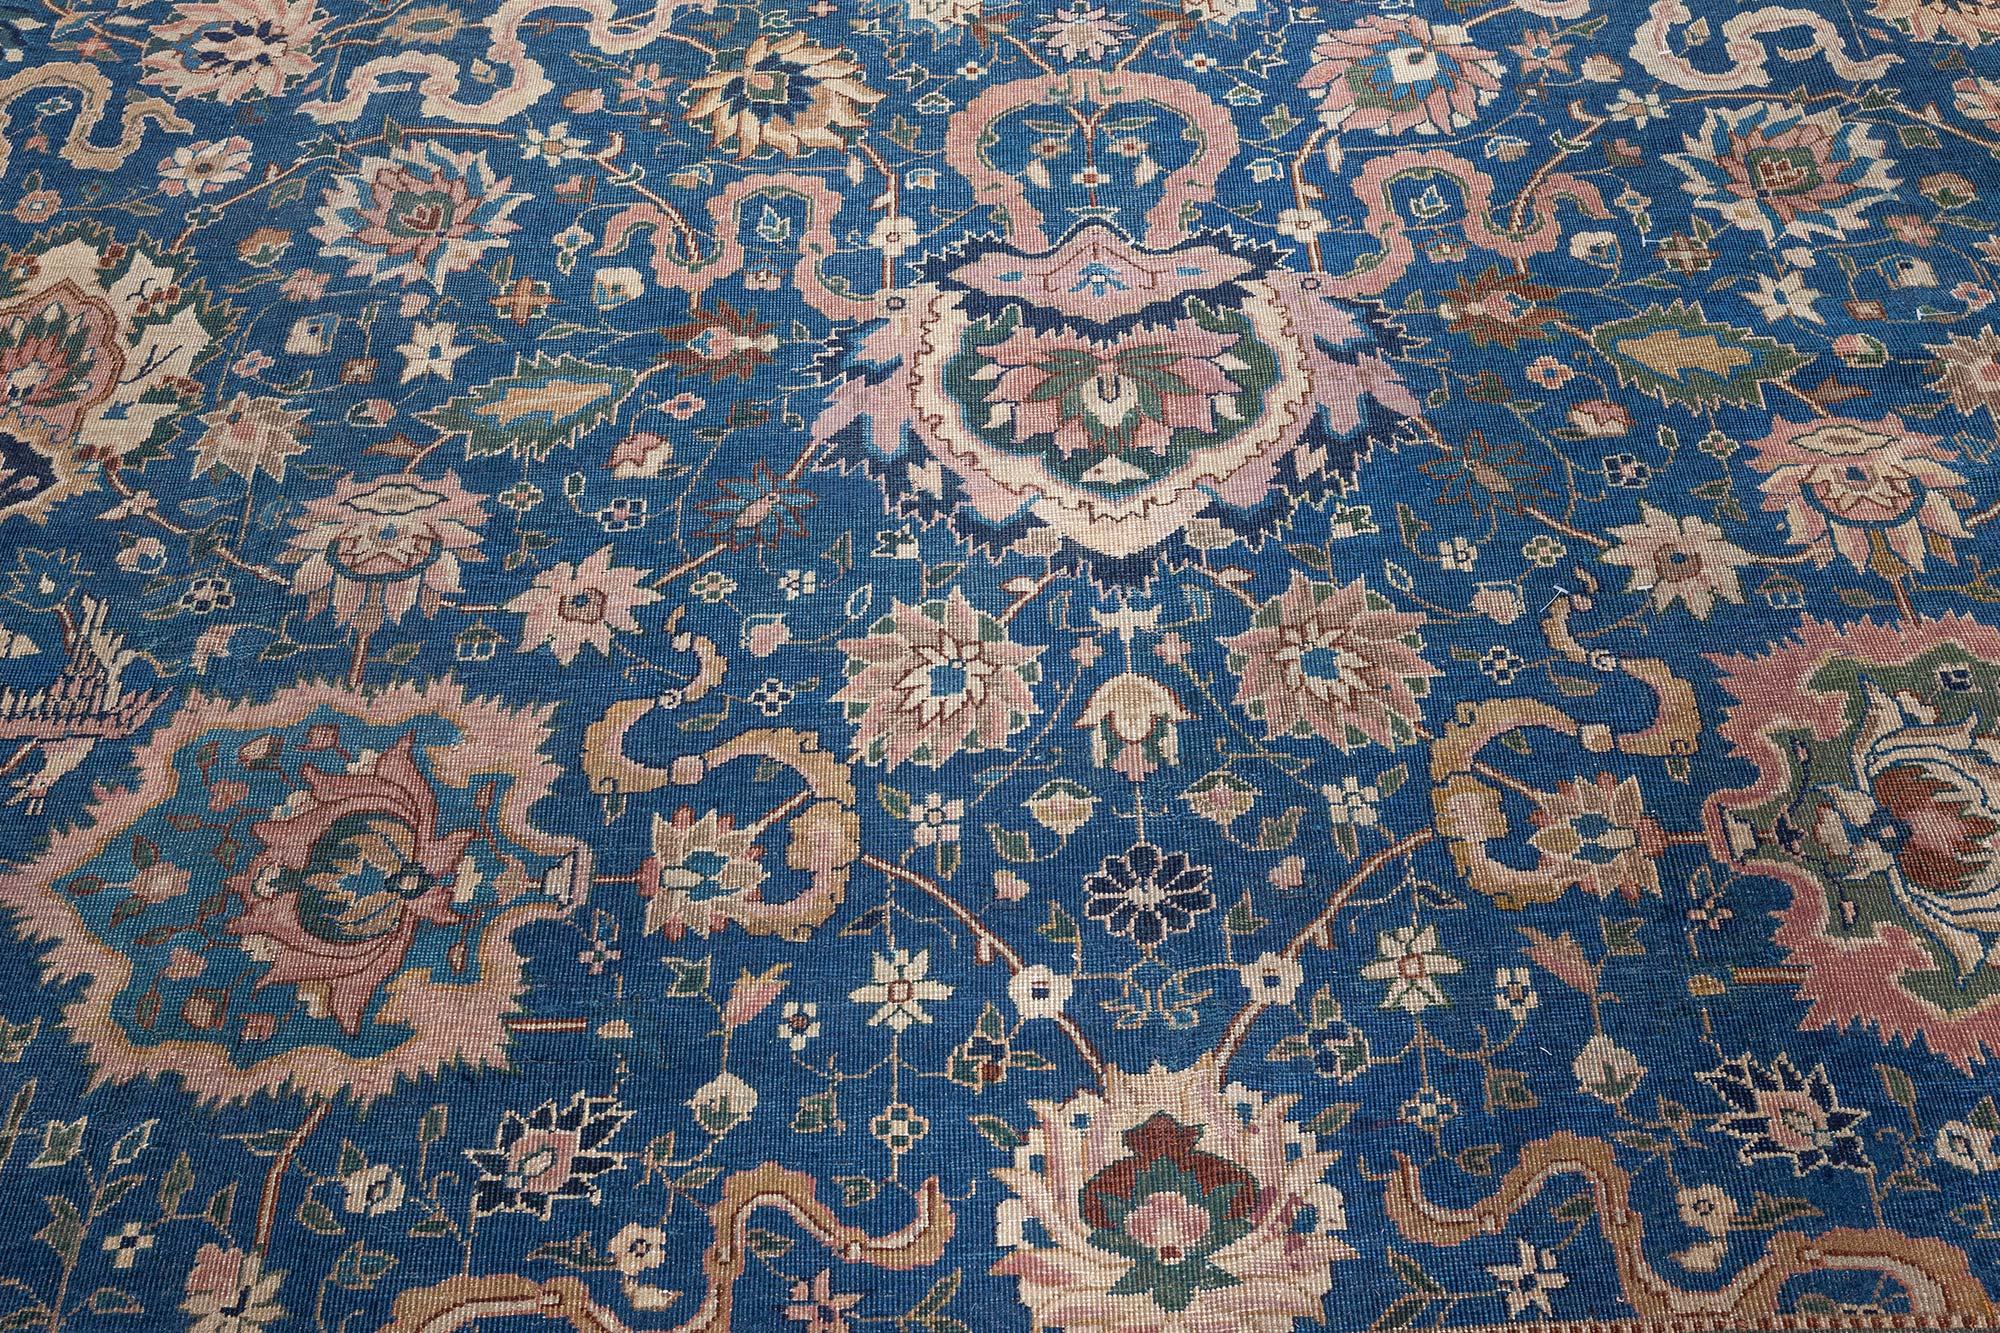 Antique Indian midnight blue and beige handwoven wool carpet
Size: 12'0